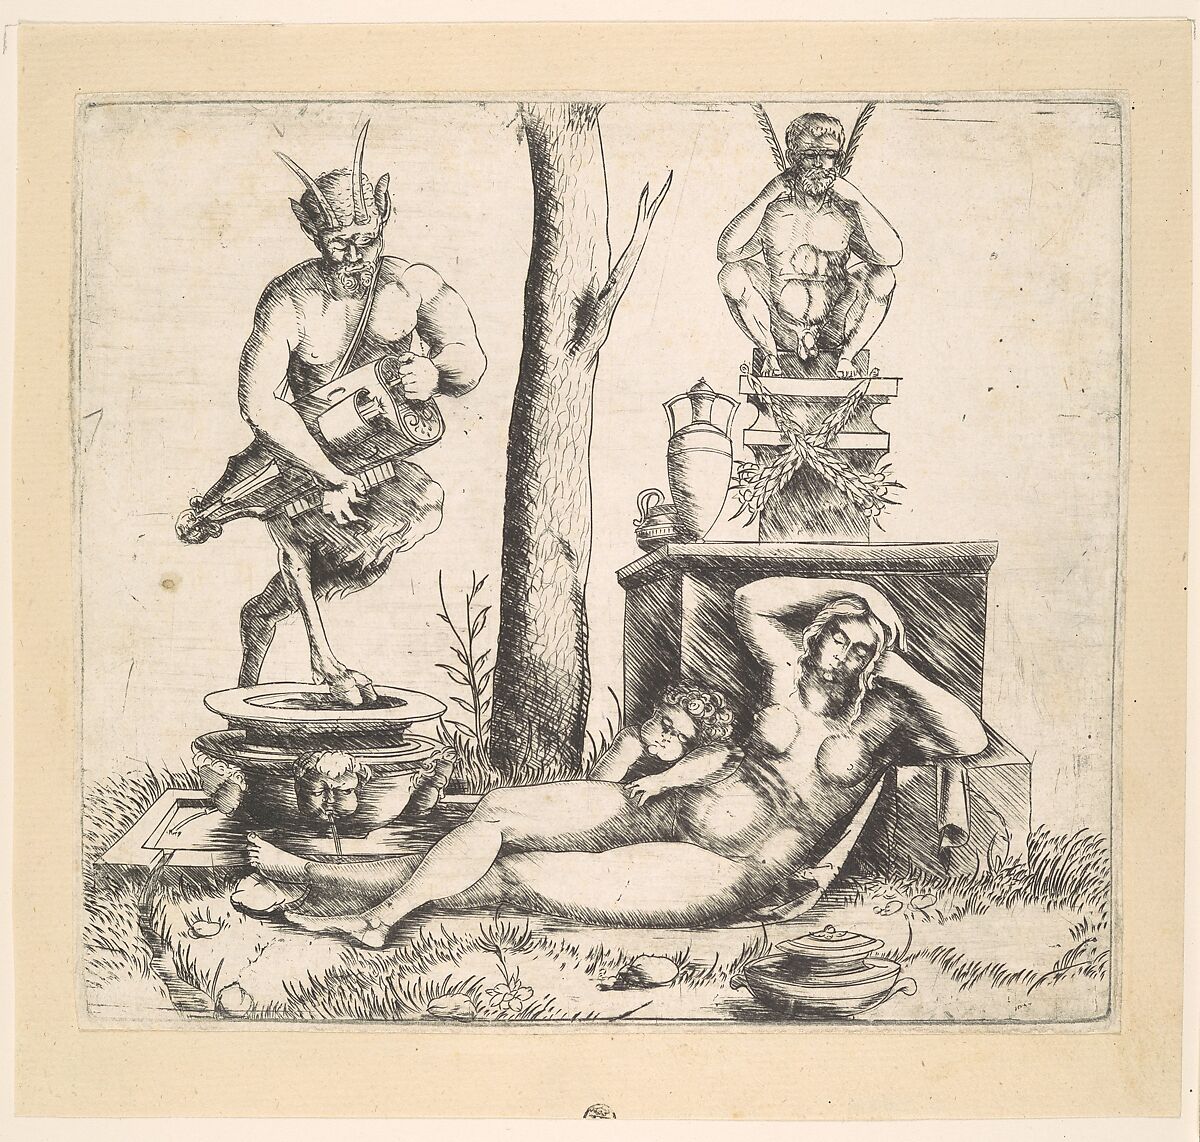 Satyr playing a lyre and a sleeping nymph